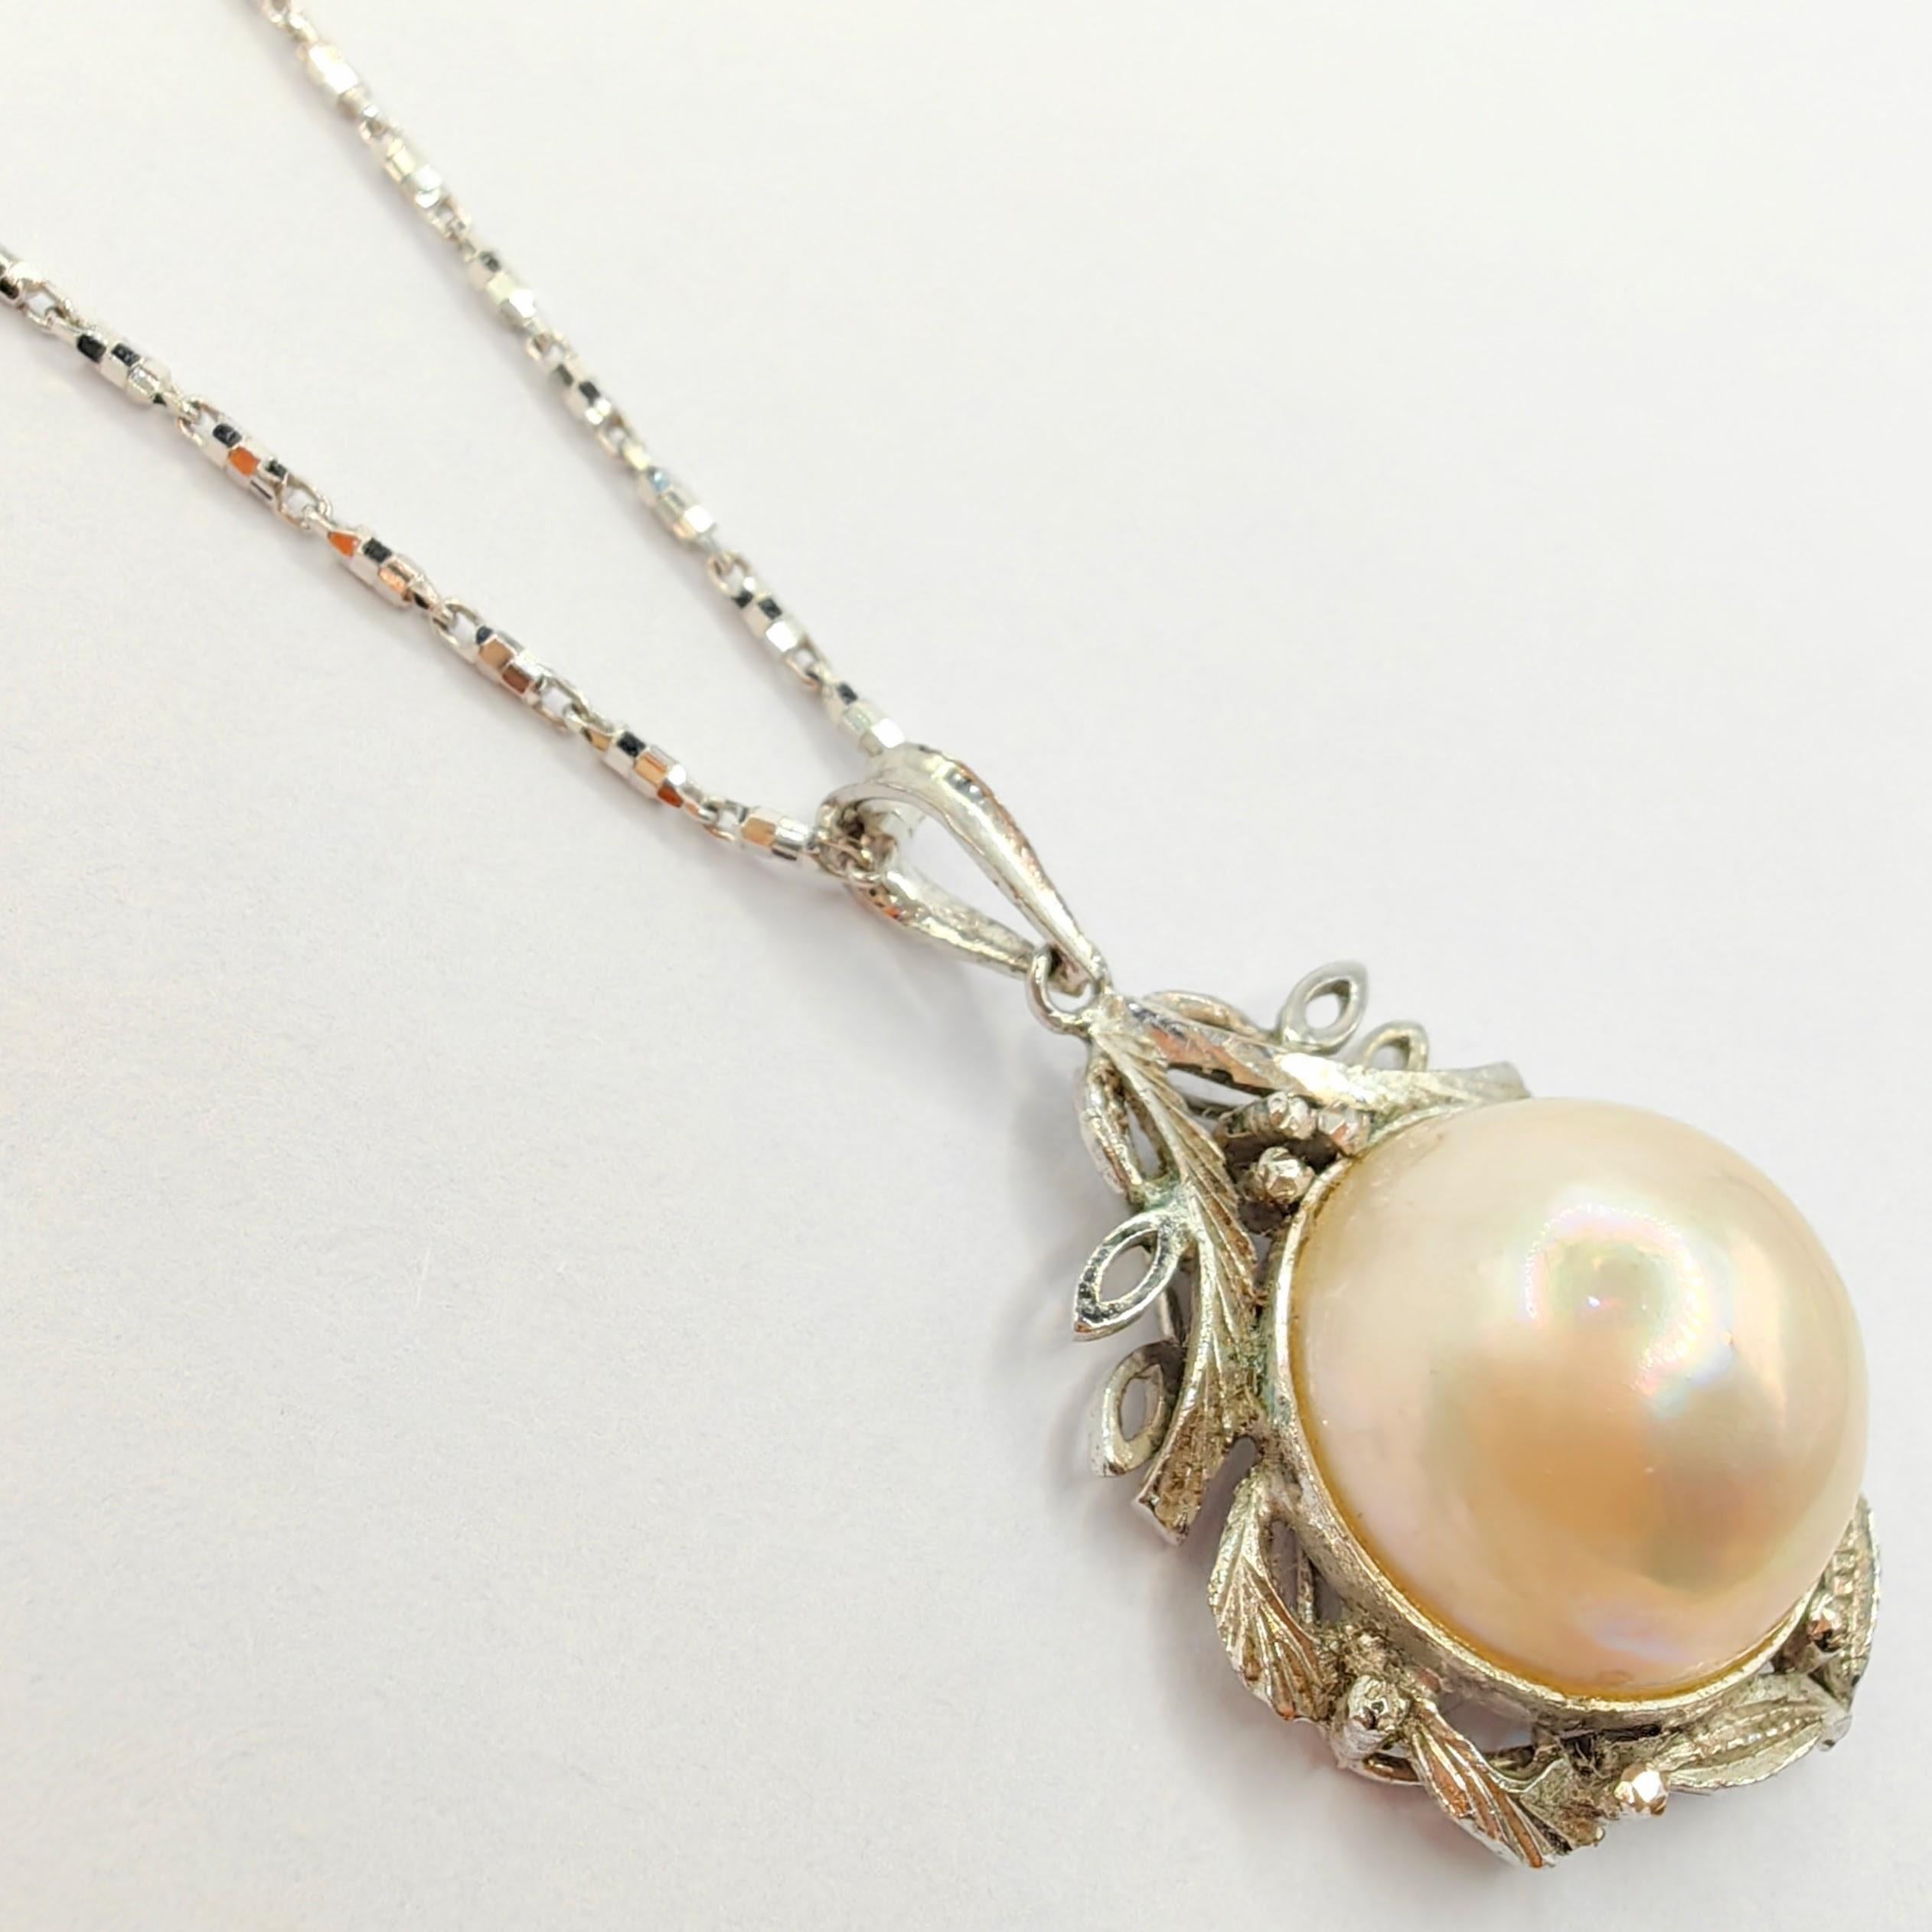 Vintage Baroque Style 14mm Mabé Pearl Necklace Pendant in Sterling Silver In New Condition For Sale In Wan Chai District, HK